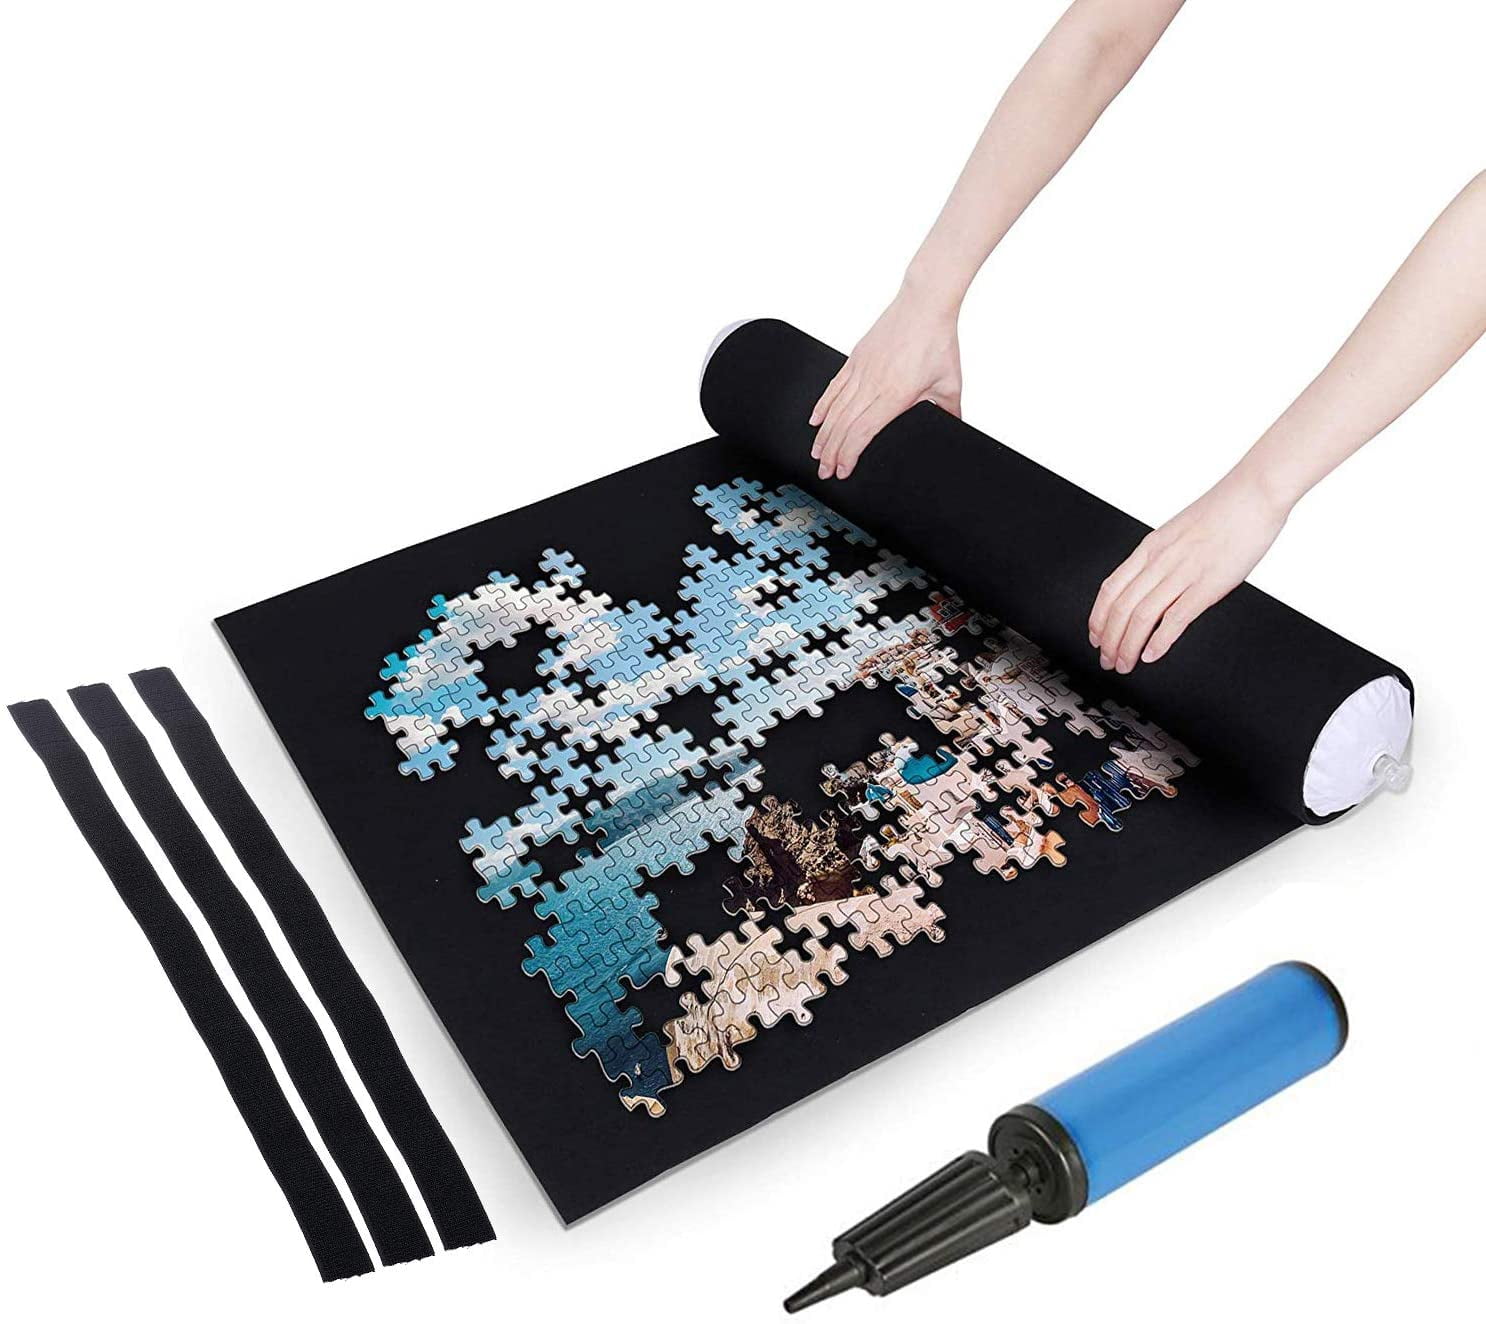 Shotbow Puzzle Mat Roll Up for Jigsaw Puzzles Felt Mat for Puzzle Storage Puzzle Saver Up to 1500 Pieces with Felt Puzzle Mat Inflatable Tube Bonus Mini Pump 3 Fixed Bar Drawstring Storage Bag Black